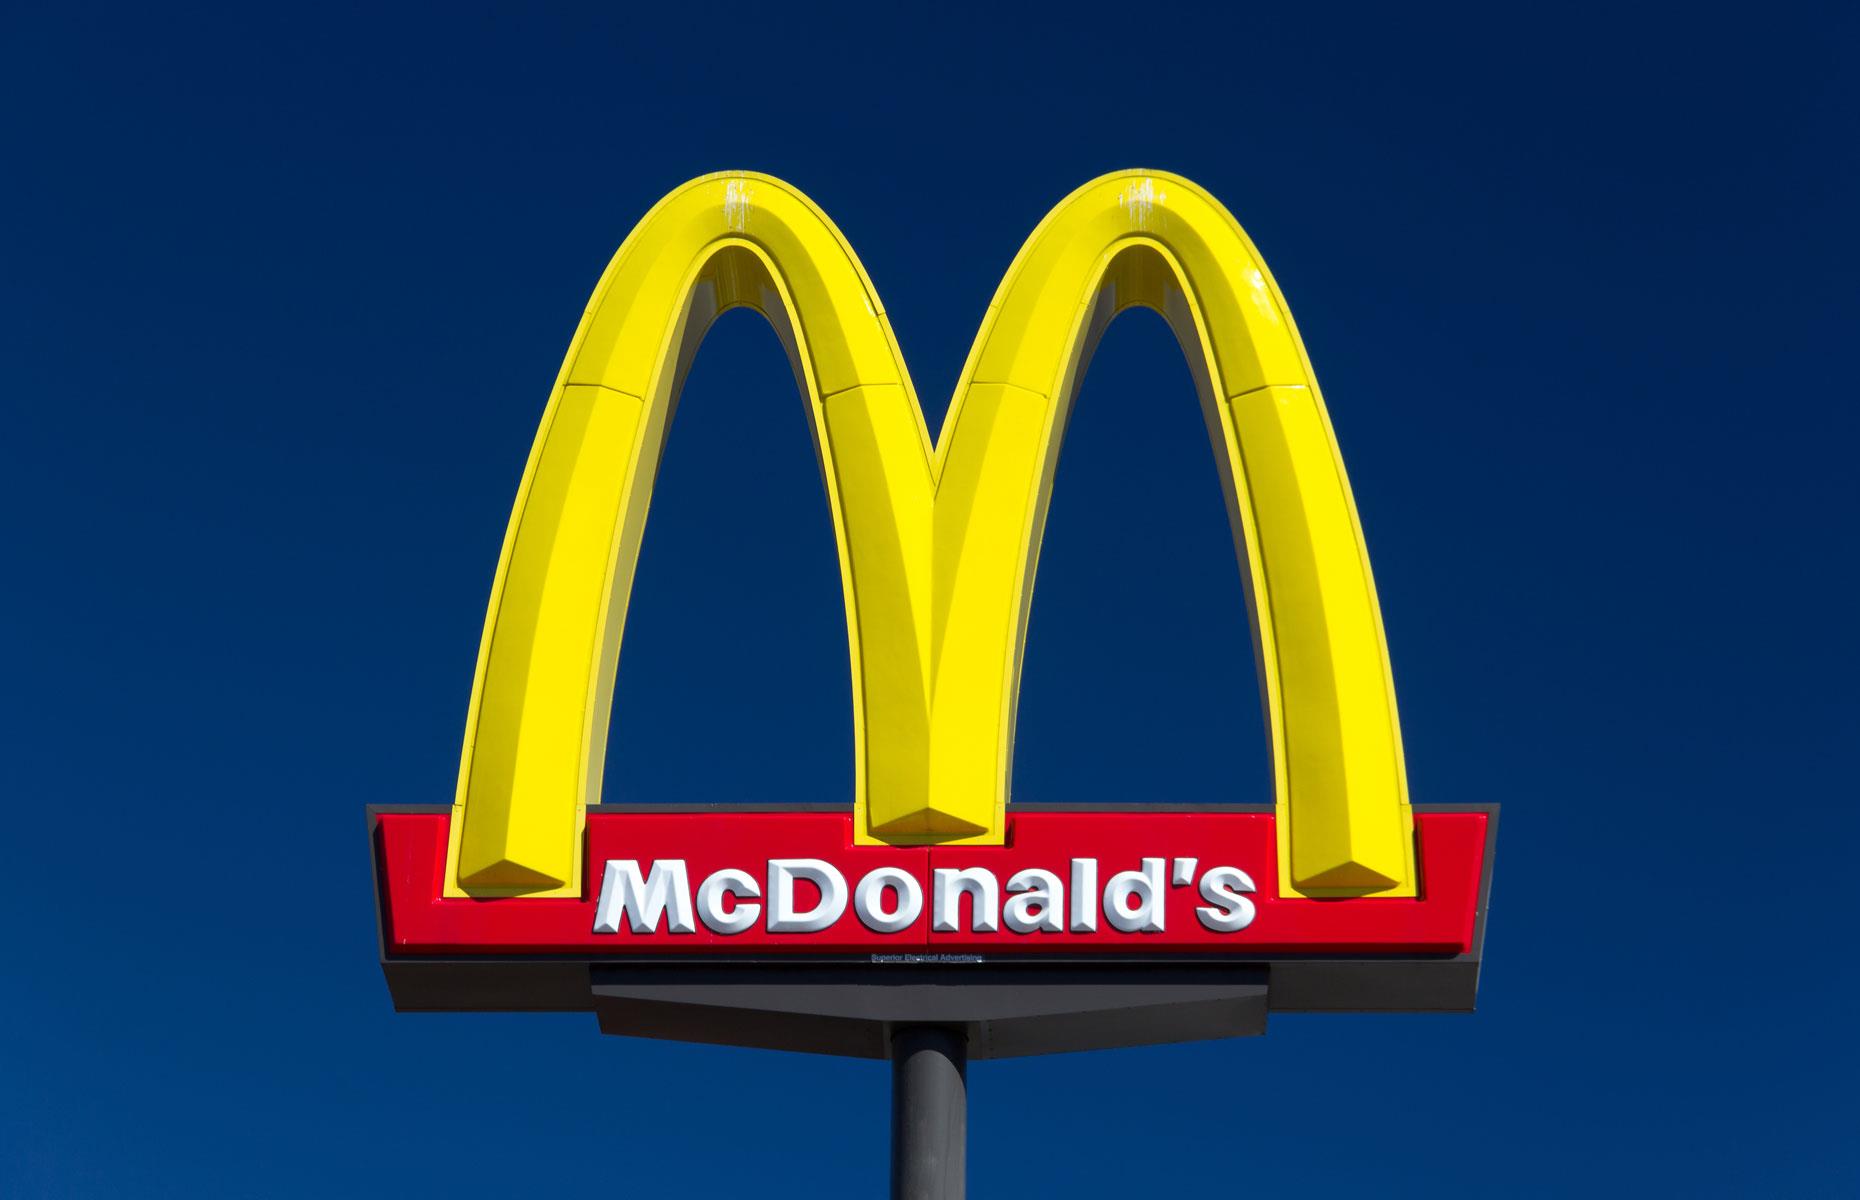 1965 – McDonald’s: $1,000 invested then is worth $4.1 million (£2.8m) today + dividends